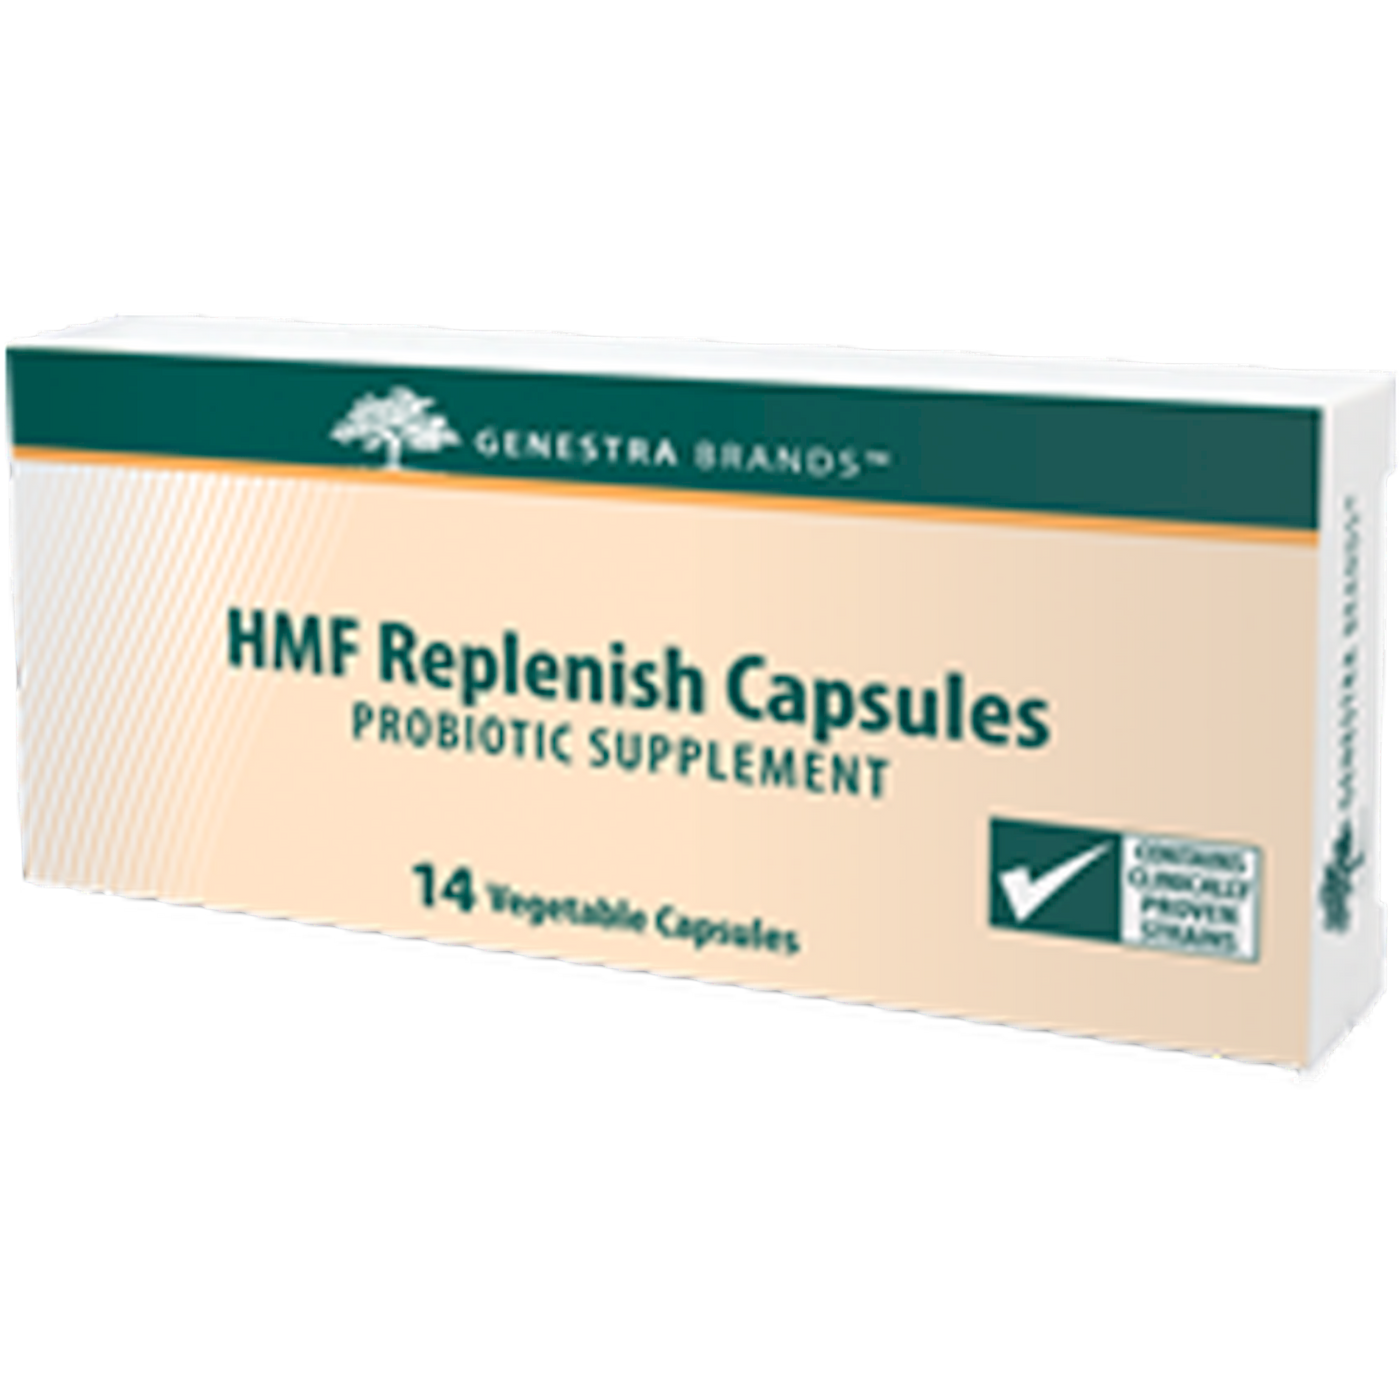 HMF Replenish Capsules 14 vcaps Curated Wellness